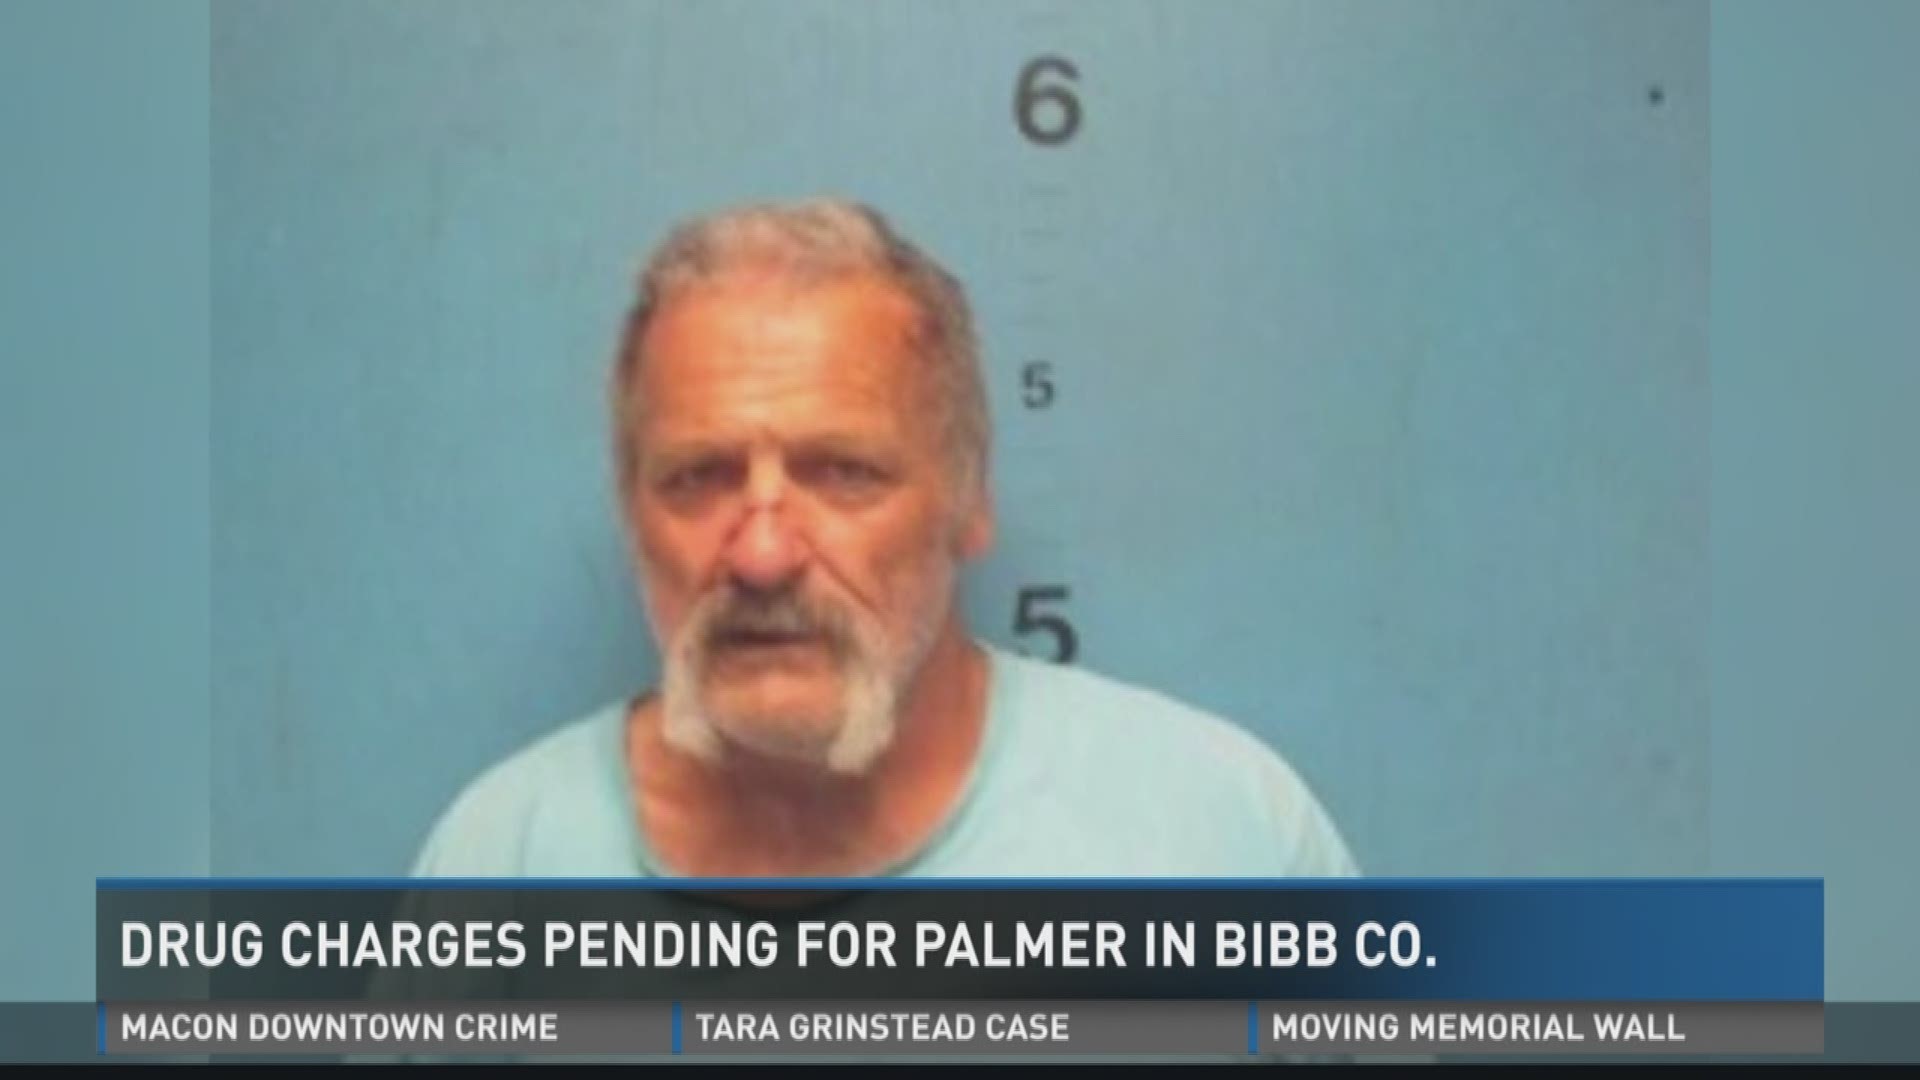 Drug charges pending for Thomas Palmer in Bibb County